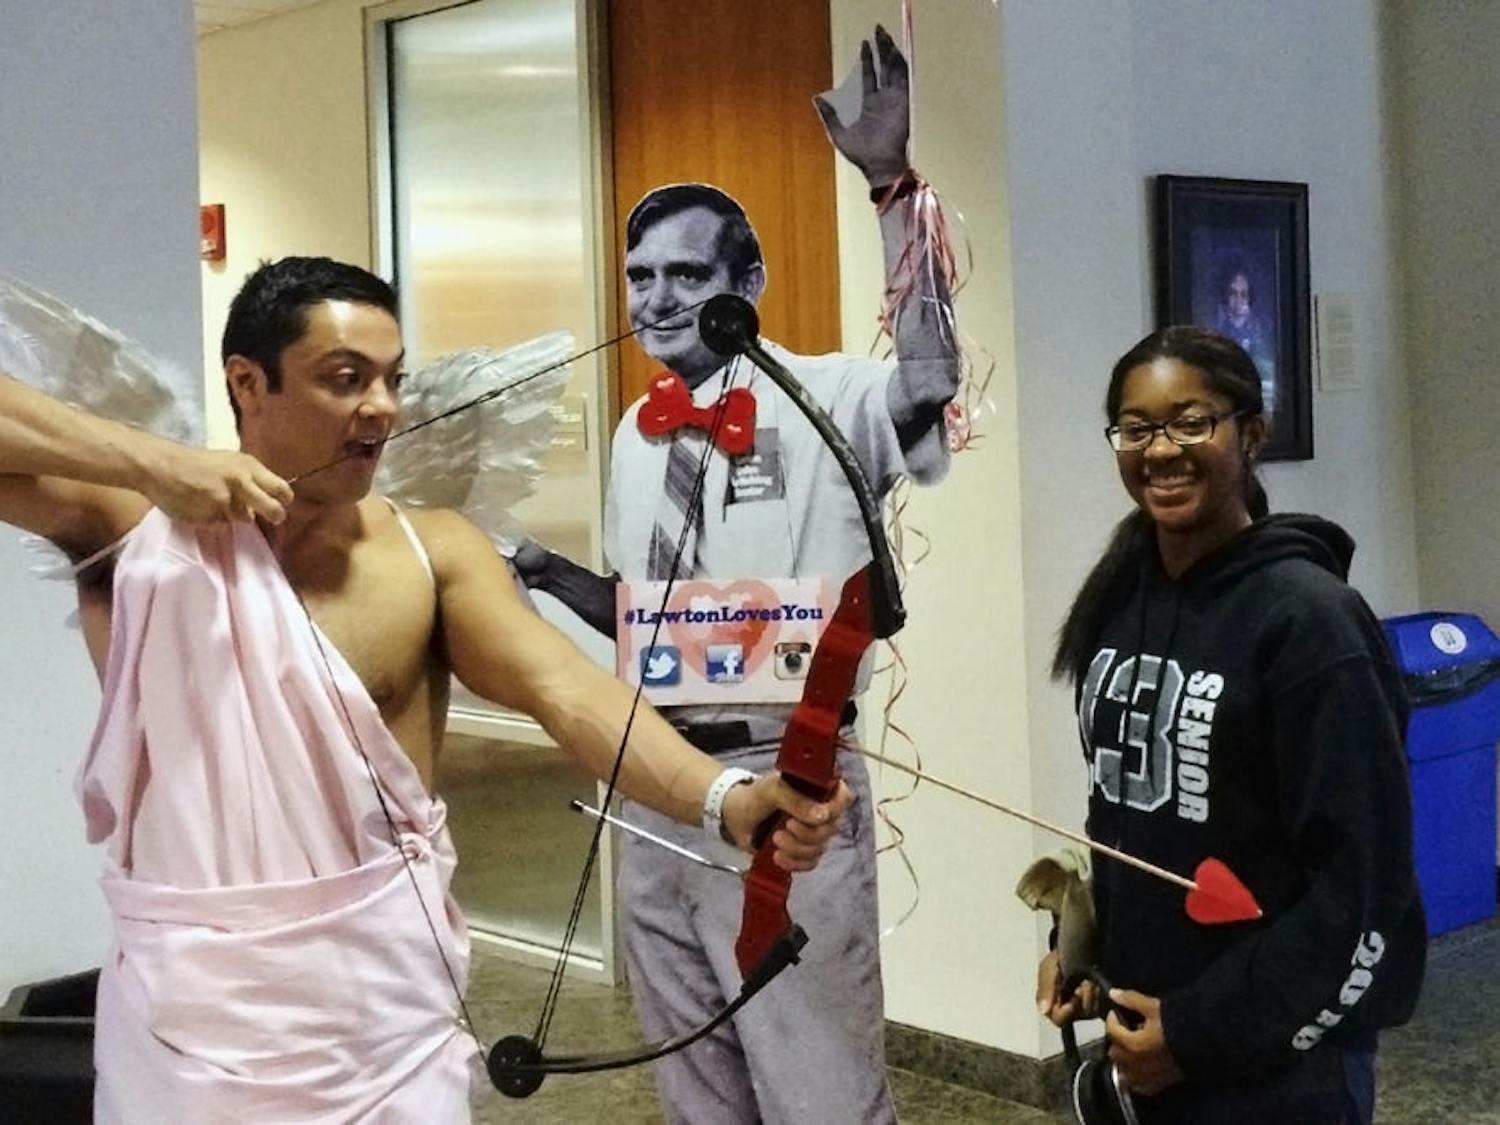 Bobby Walsh (left), a 25-year-old UF law student, poses for a picture while dressed as Cupid at the Lawton Chiles Legal Information Center open house in the Law library Thursday.